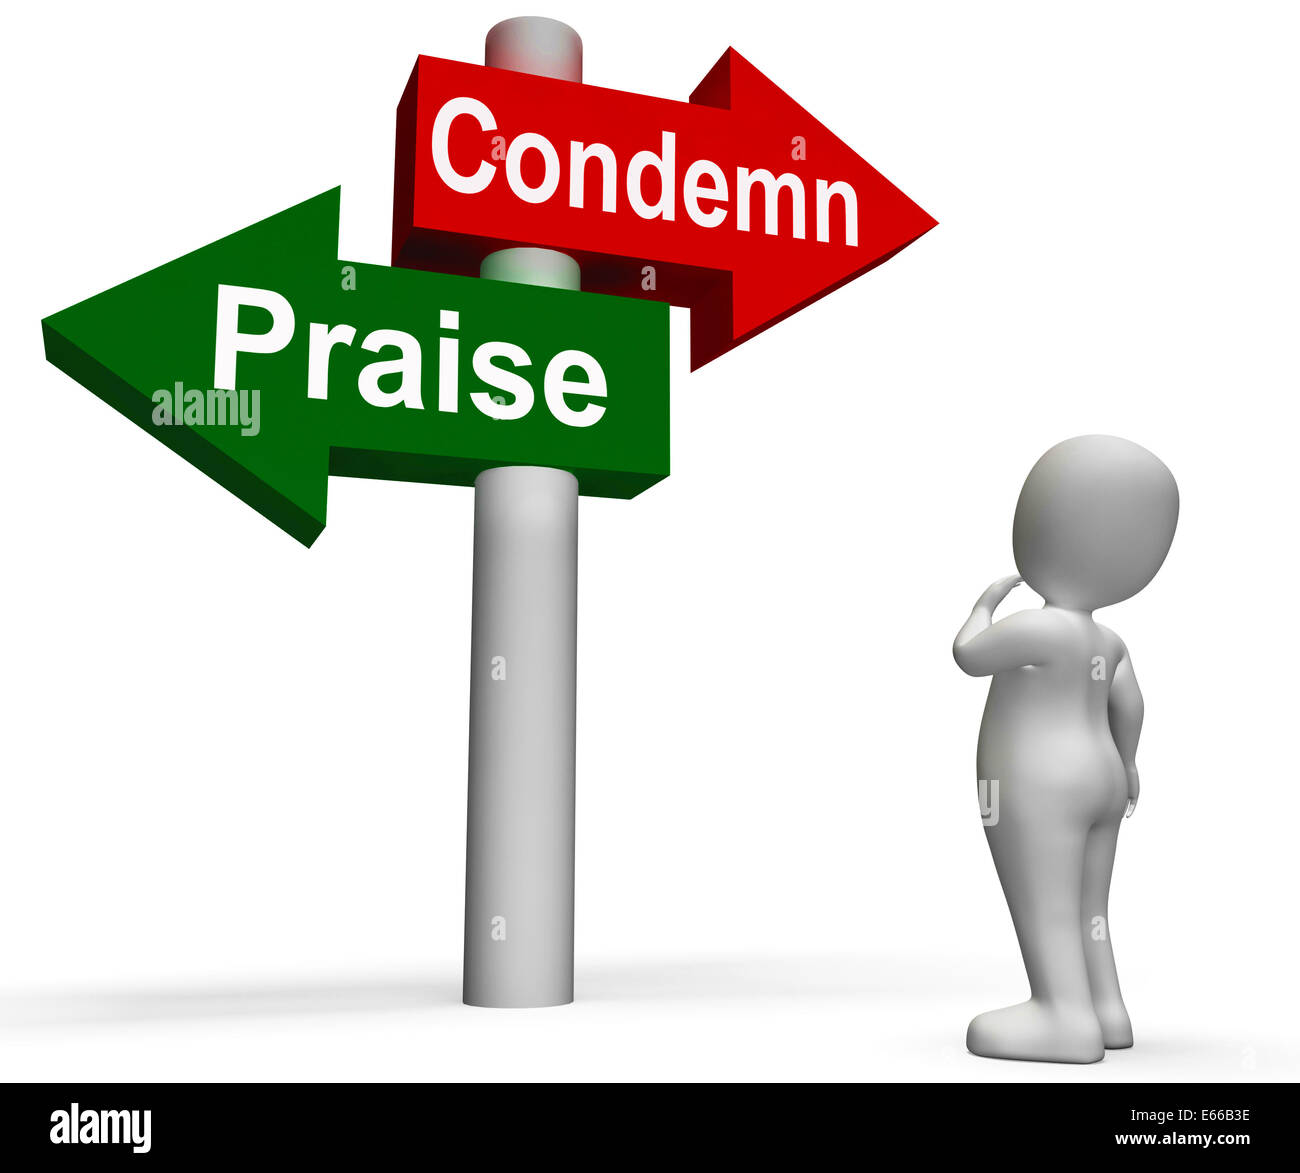 Condemn Praise Signpost Meaning Appreciate or Blame Stock Photo